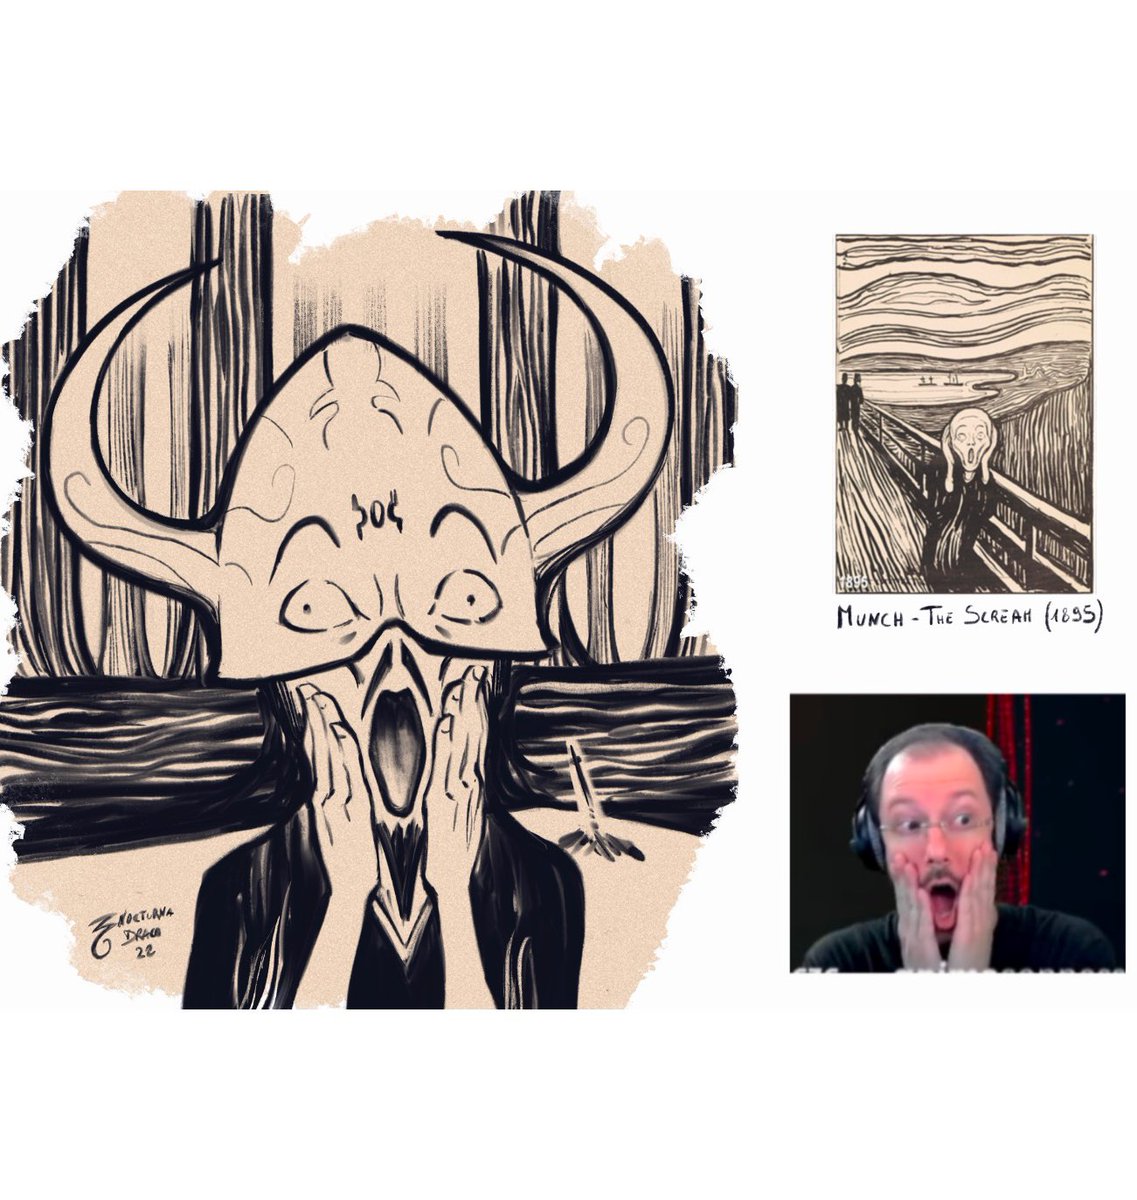 Usually when I do warmups, I like to sketch funny faces. When I've collected enough, I make a single post. 

This is the sixth part of @sabakunomaiku sketch collection. 

This time I did two special ones as Munch's art style study.

#sketch #twitch #twitchstreamer #sabakunomaiku 